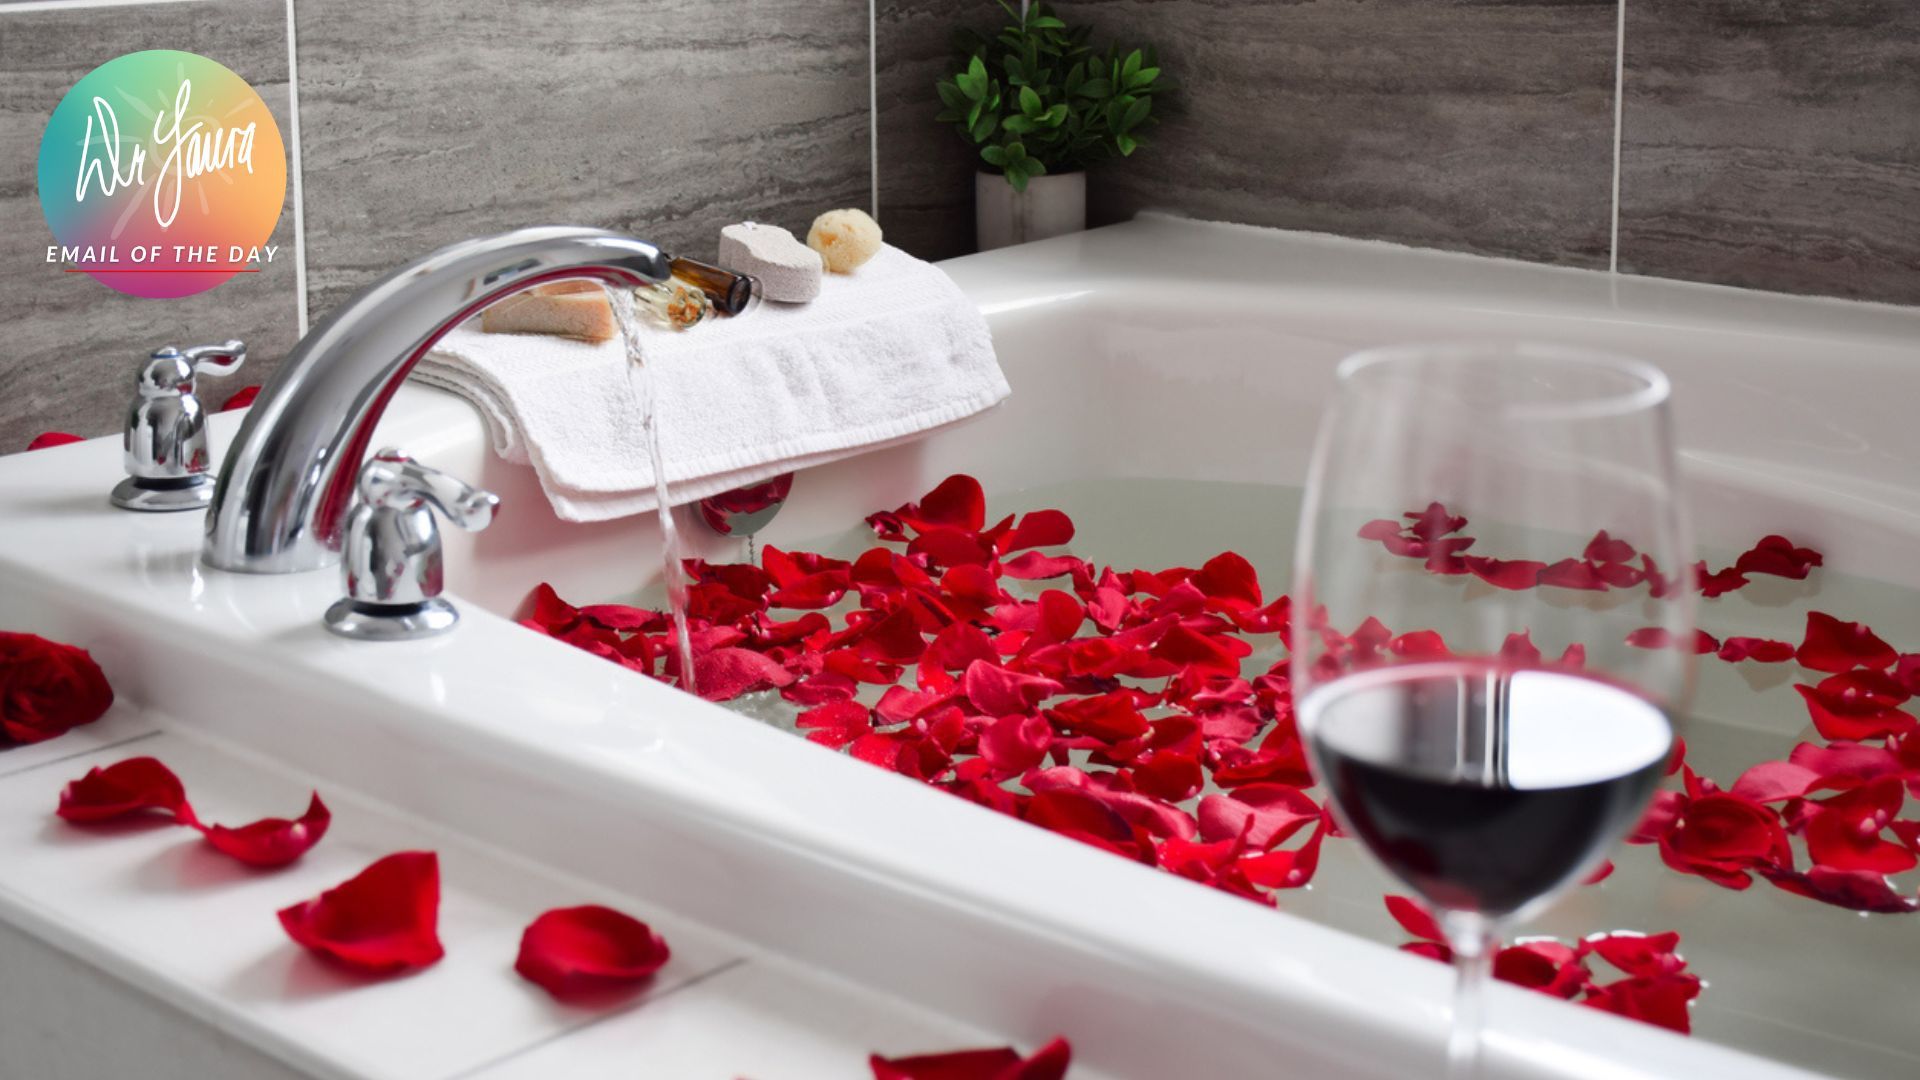 Bathtub is being filled with water while rose petals float on it and a wine glass with red wine sits next to bathtub